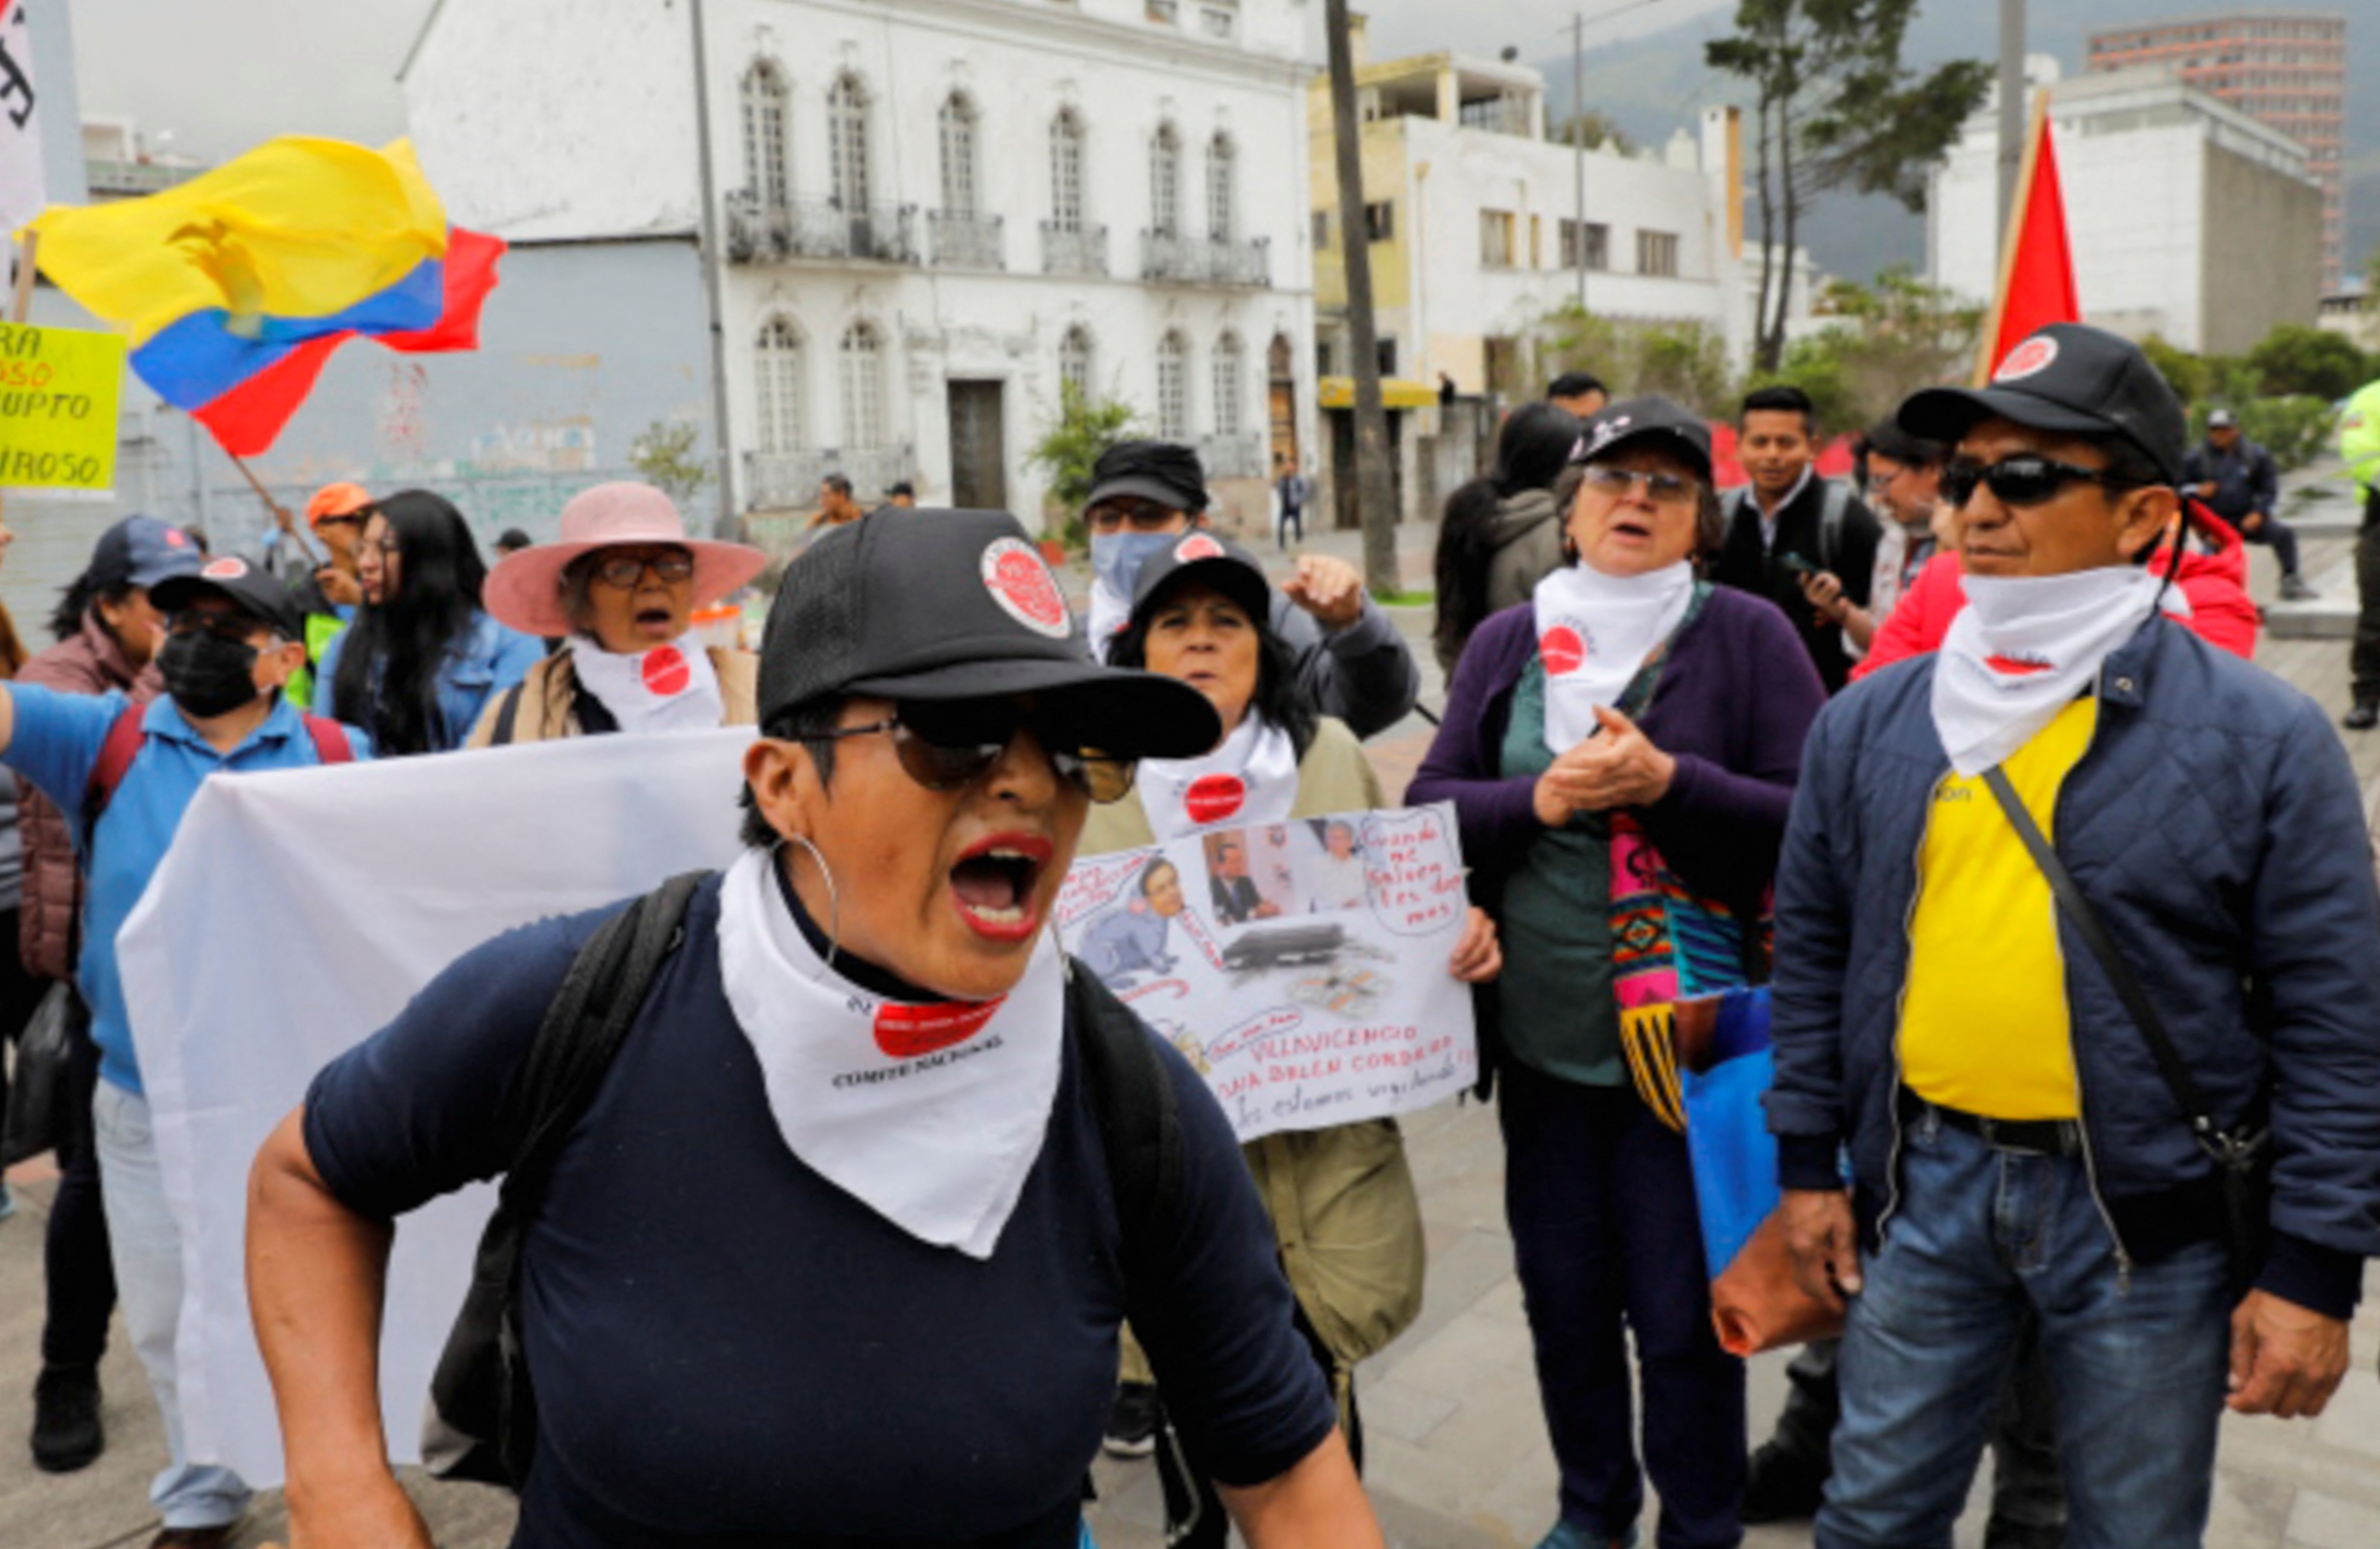 Ecuador lawmaker says there is 'compelling' graft evidence against  President Lasso